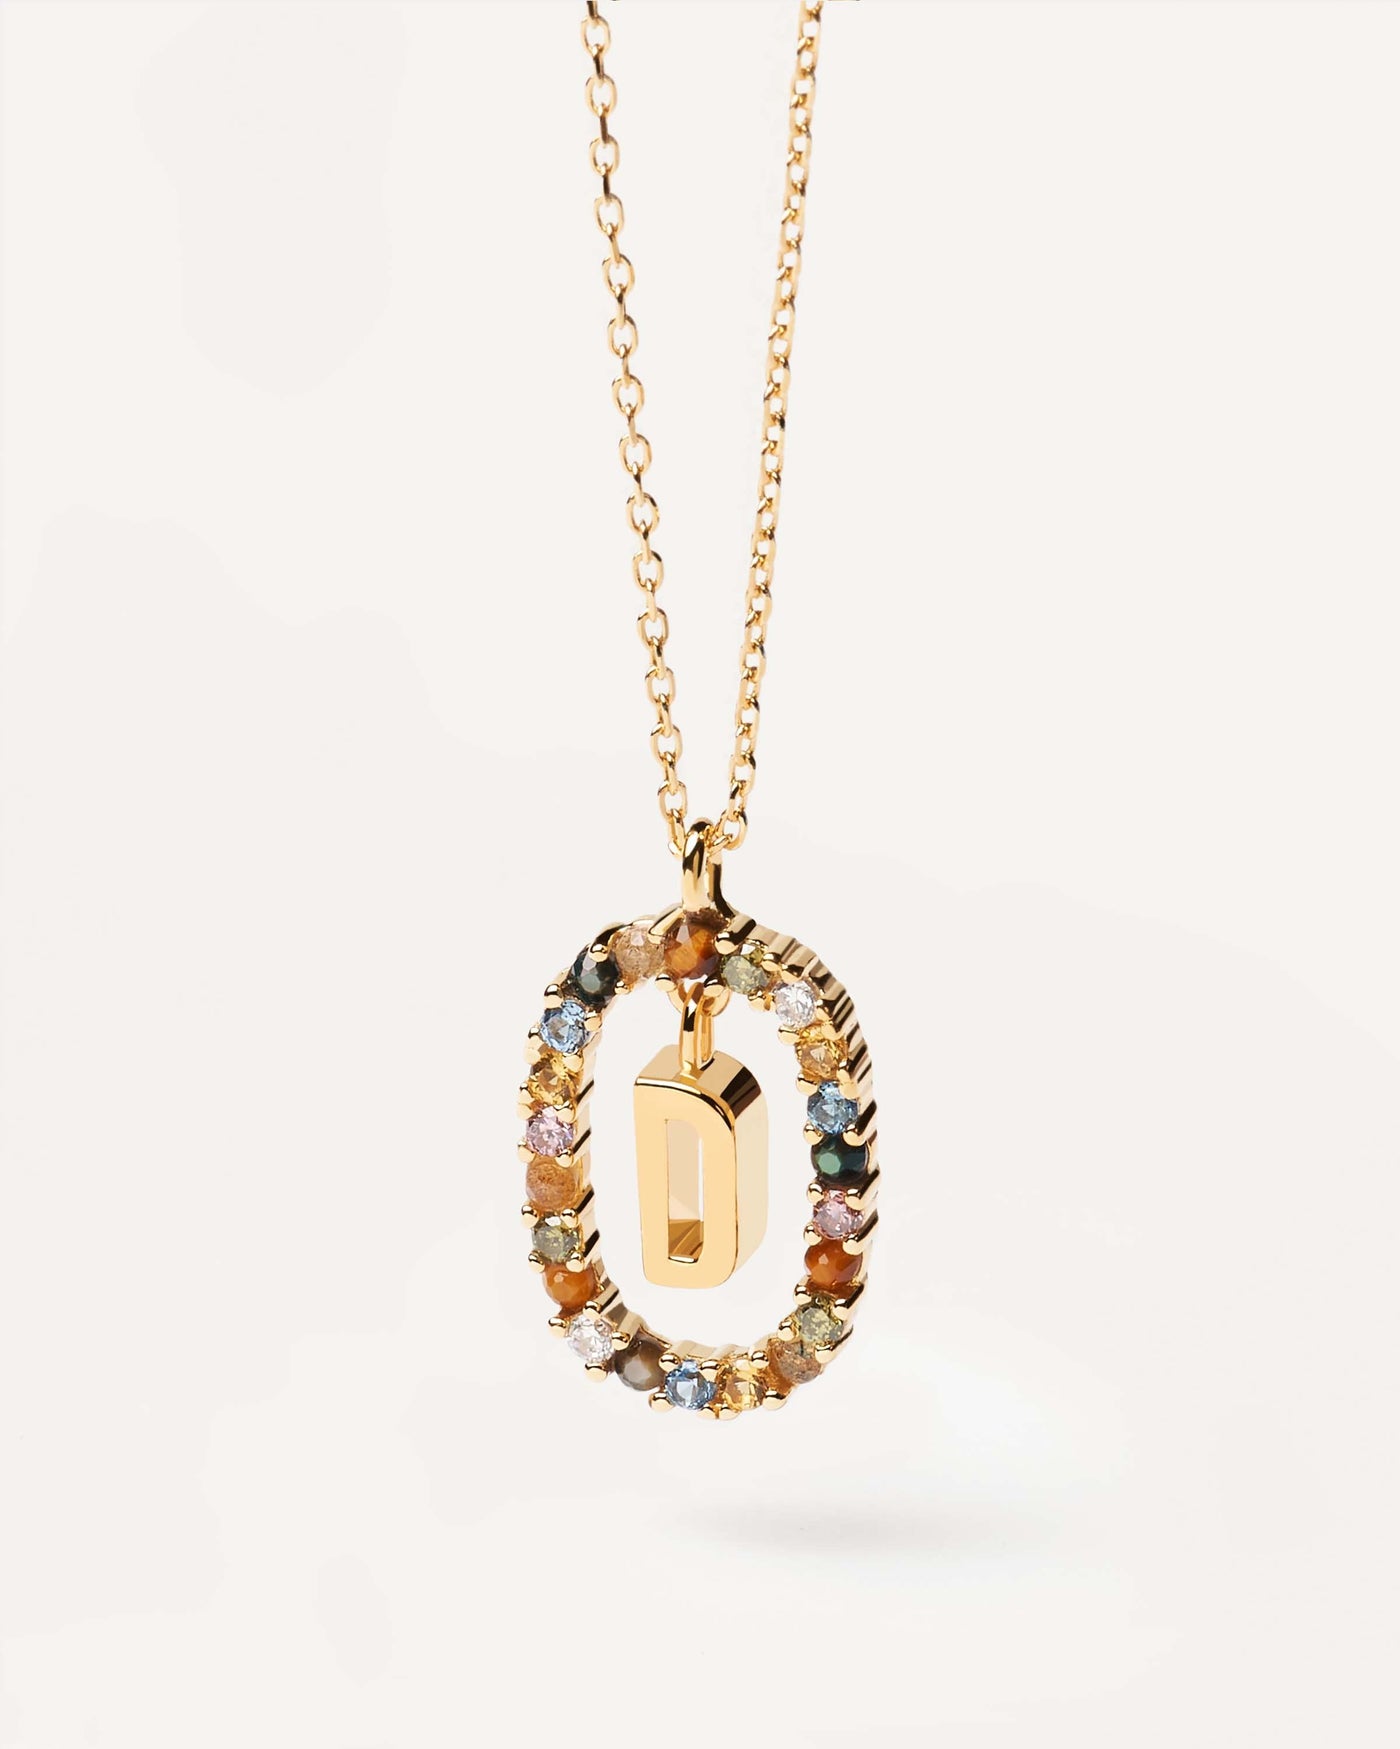 2023 Selection | Letter D necklace. Initial D necklace in gold-plated silver, circled by colorful gemstones. Get the latest arrival from PDPAOLA. Place your order safely and get this Best Seller. Free Shipping.